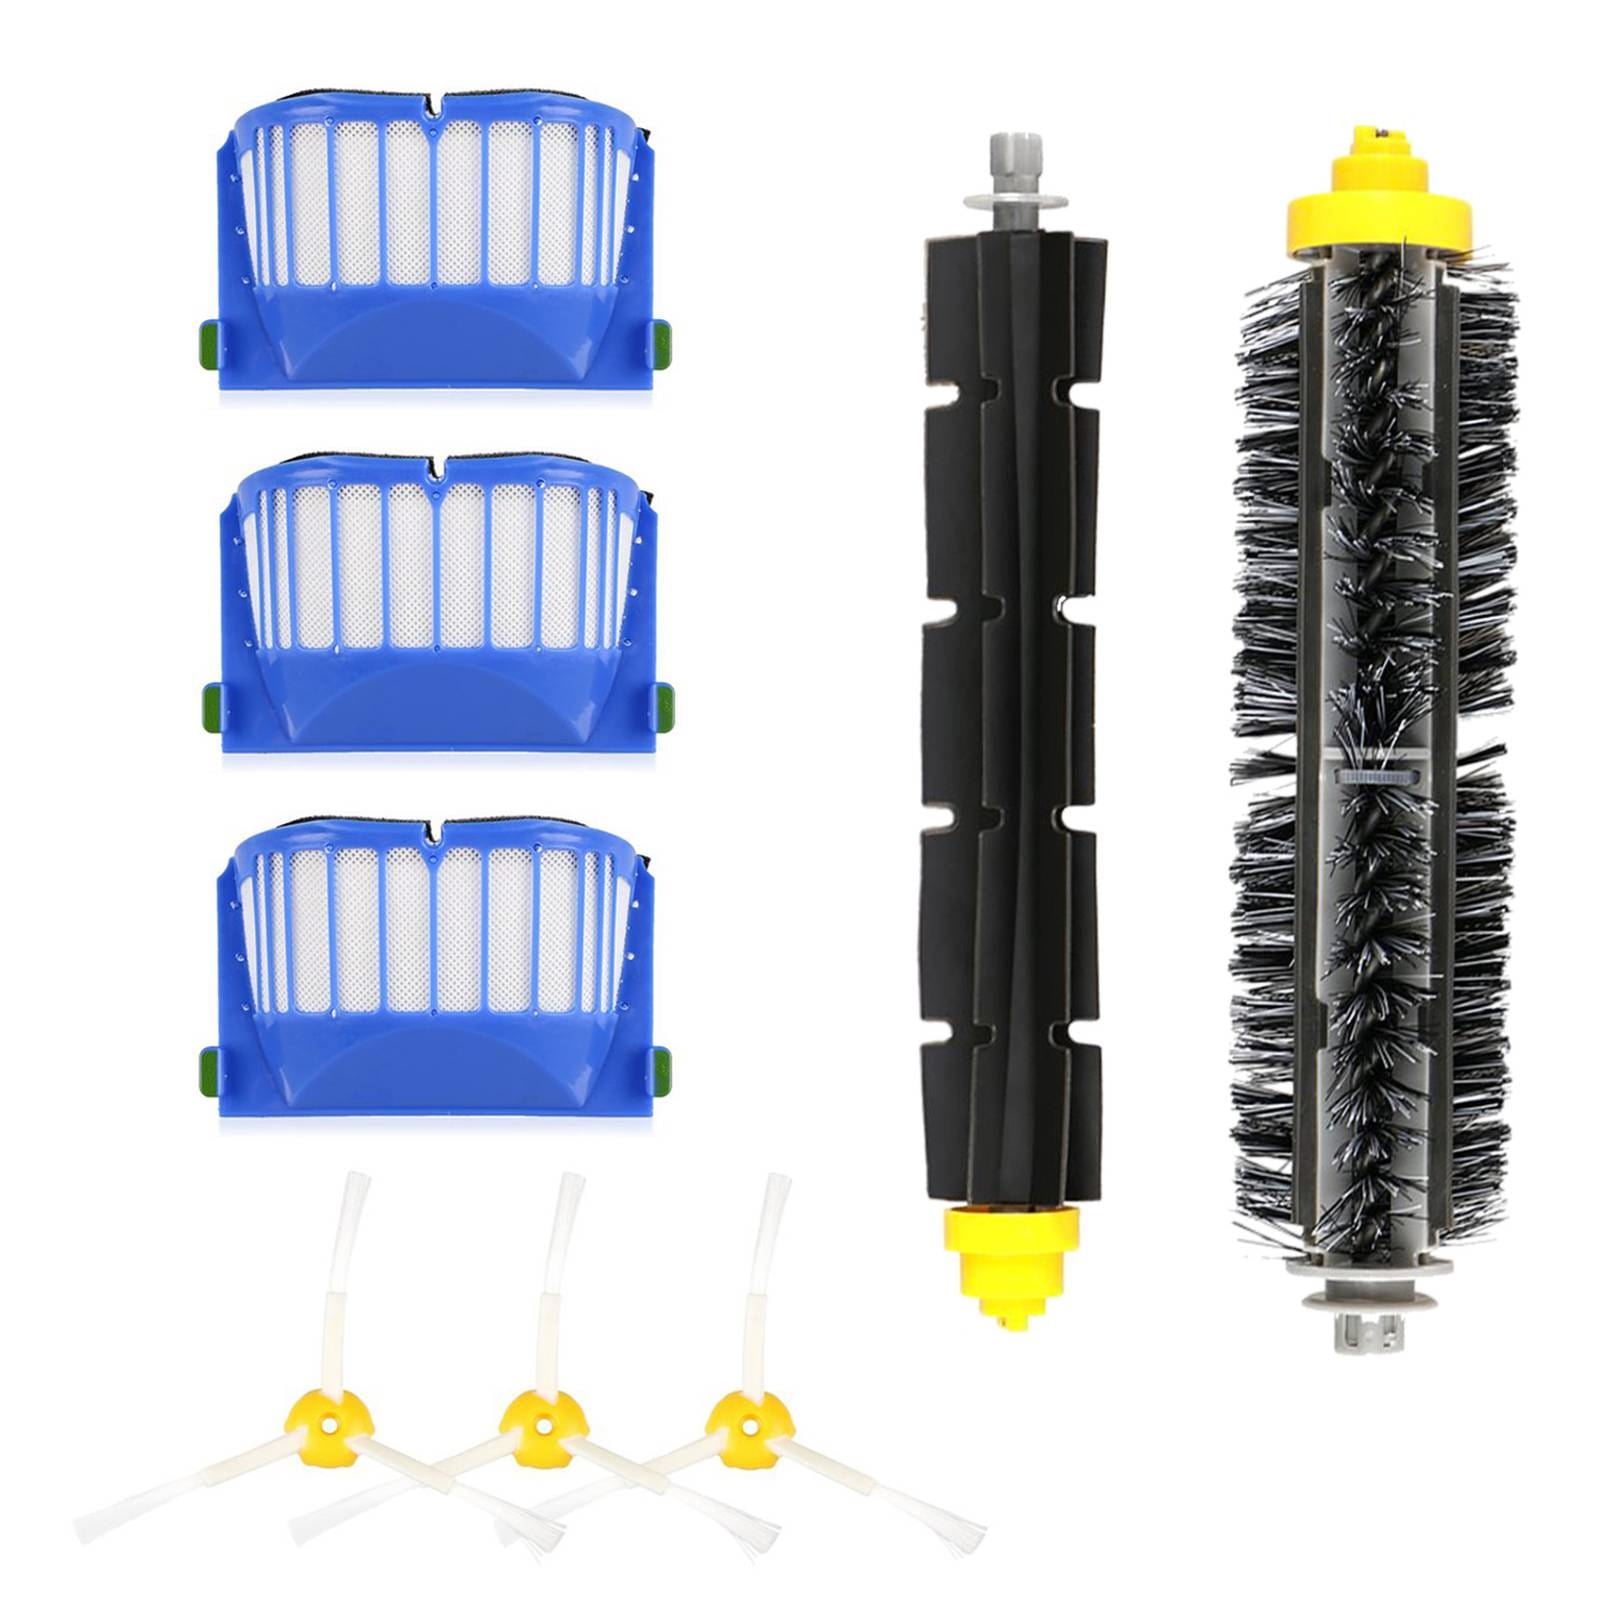 4 High-Efficiency Filters, 6 Edge-Sweeping Brushes, 1 Castor Wheel, 1 Cleaning Tool and 1 Set Multi-Surface Rubber Brushes Replenishment Replacement Parts for iRobot Roomba i7 and i7